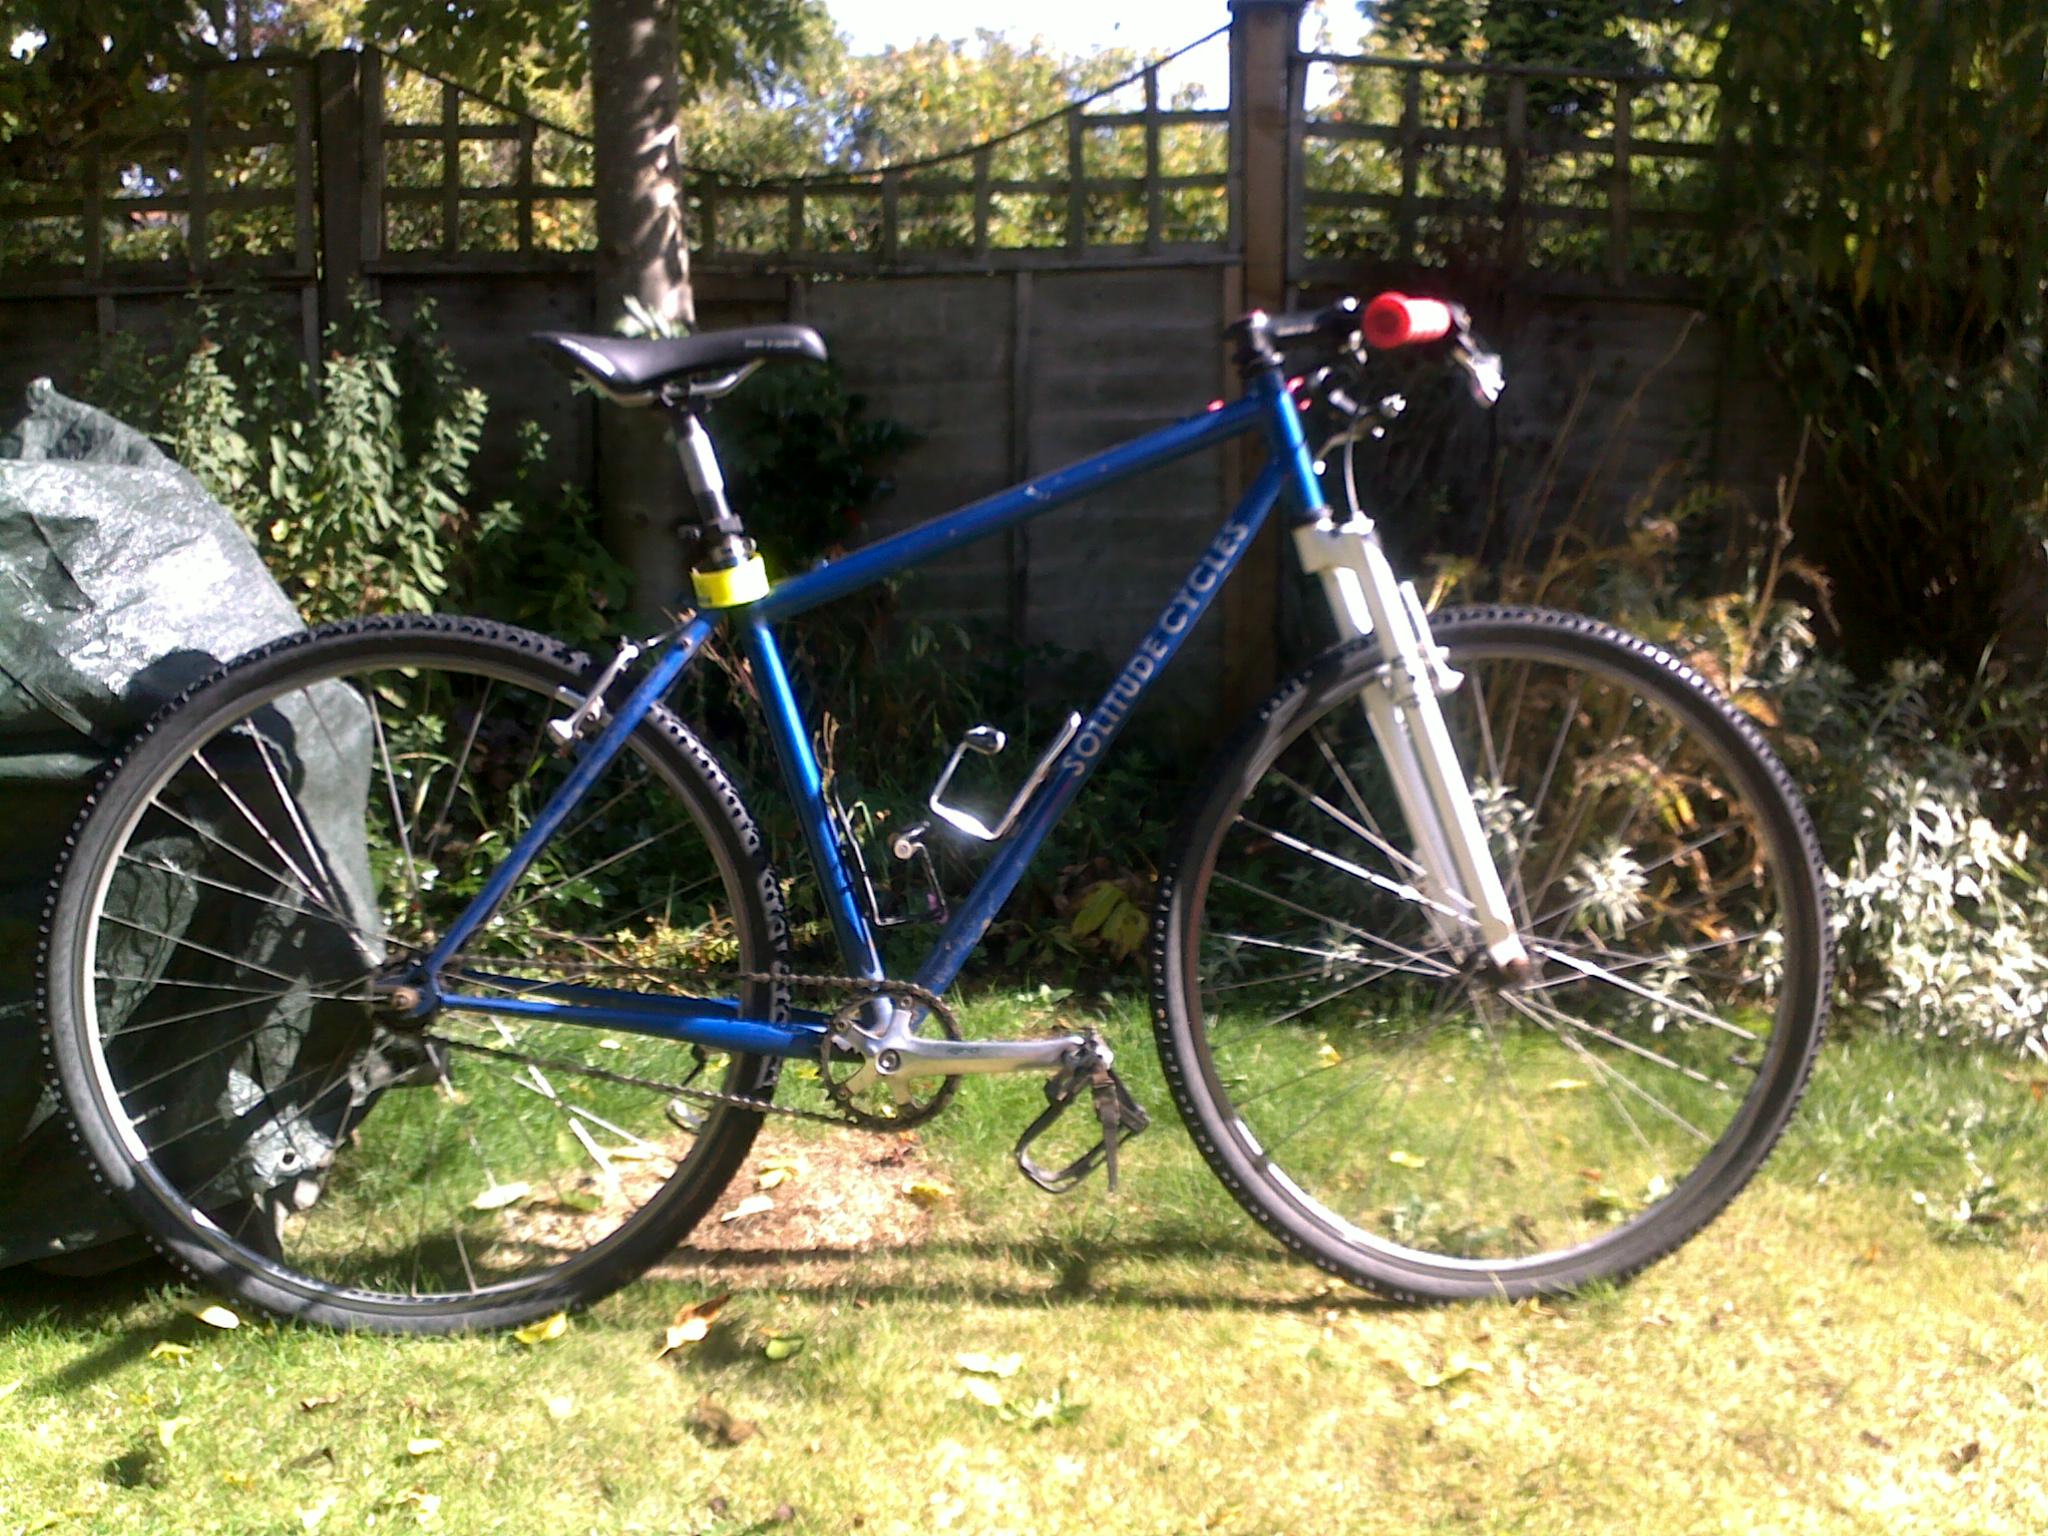 a blue bicycle parked on a grassy area